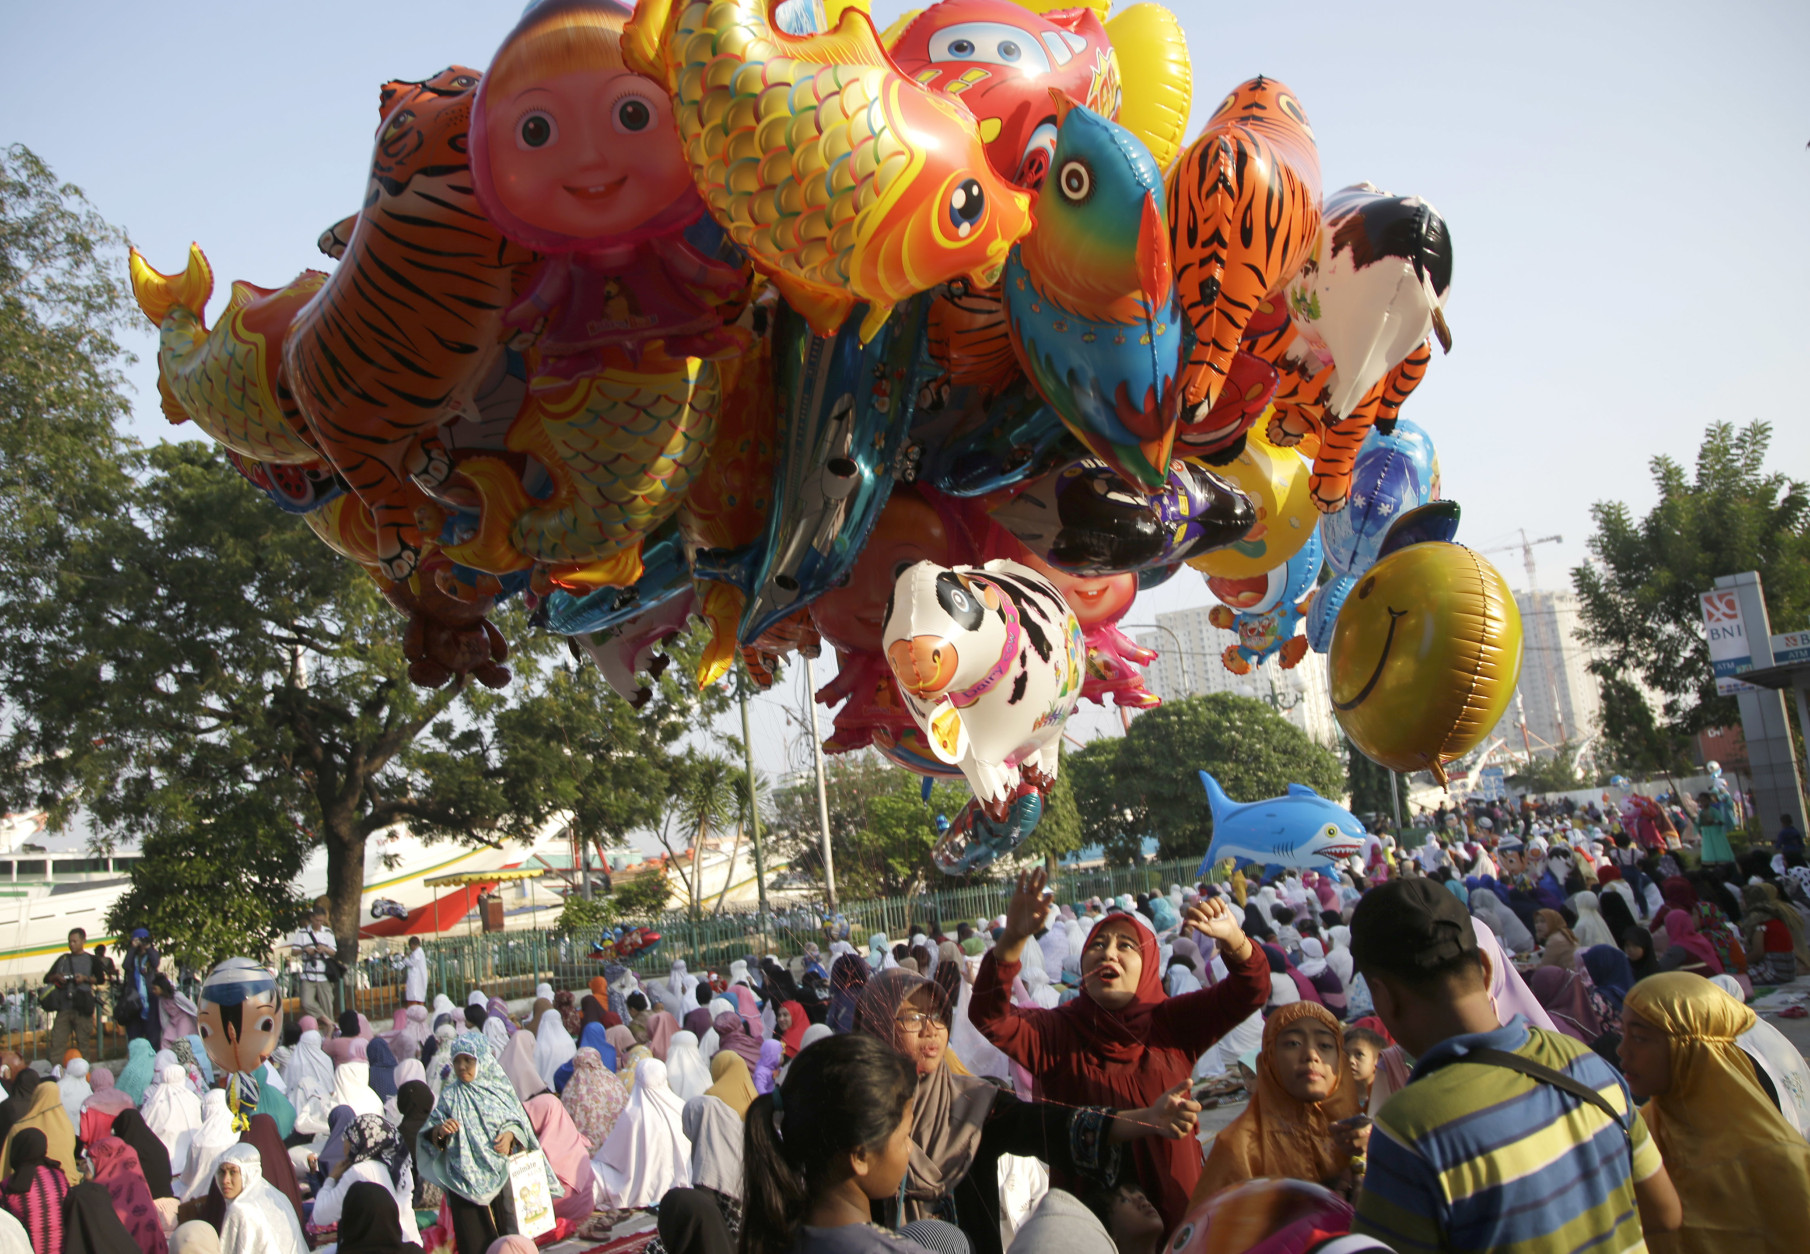 Indonesian Muslim women looks at balloons after an Eid al-Fitr prayer to mark the end of the holy fasting month of Ramadan at Sunda Kelapa port in Jakarta, Indonesia, Wednesday, July 6, 2016. (AP Photo/Tatan Syuflana)